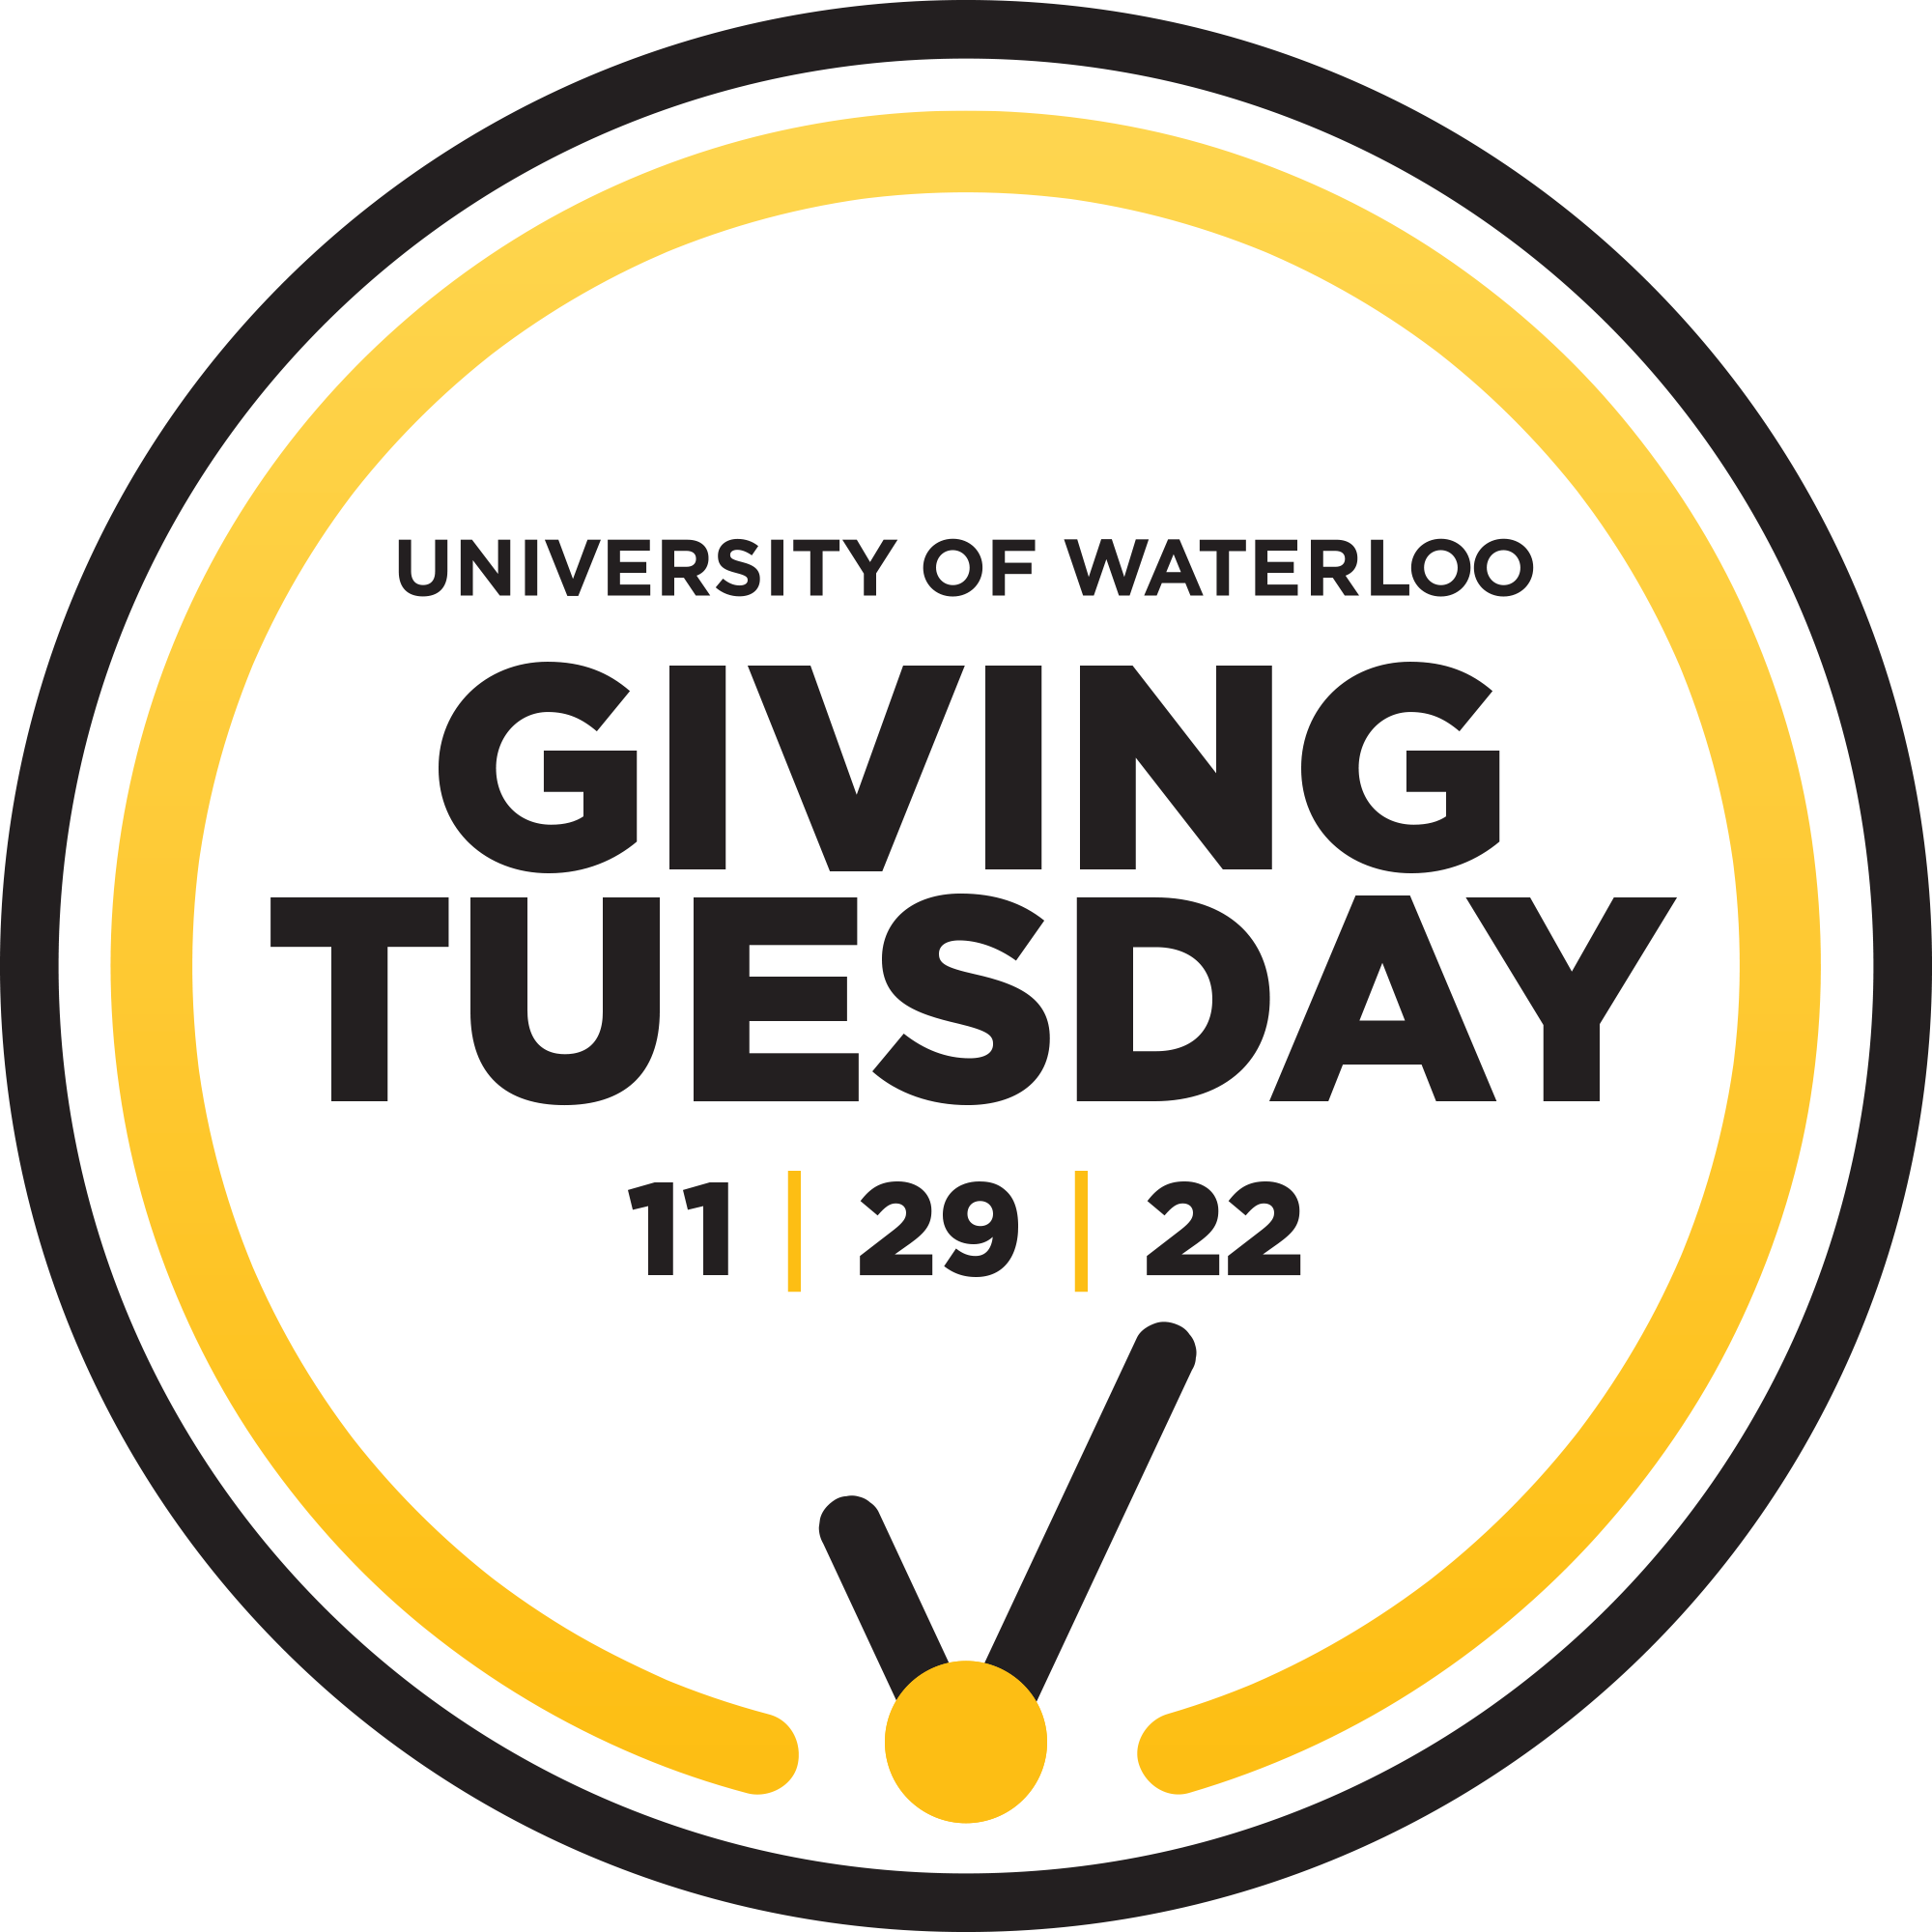 A black circle surrounding a gold circle around the words University of Waterloo Giving Tuesday 11/29/22.